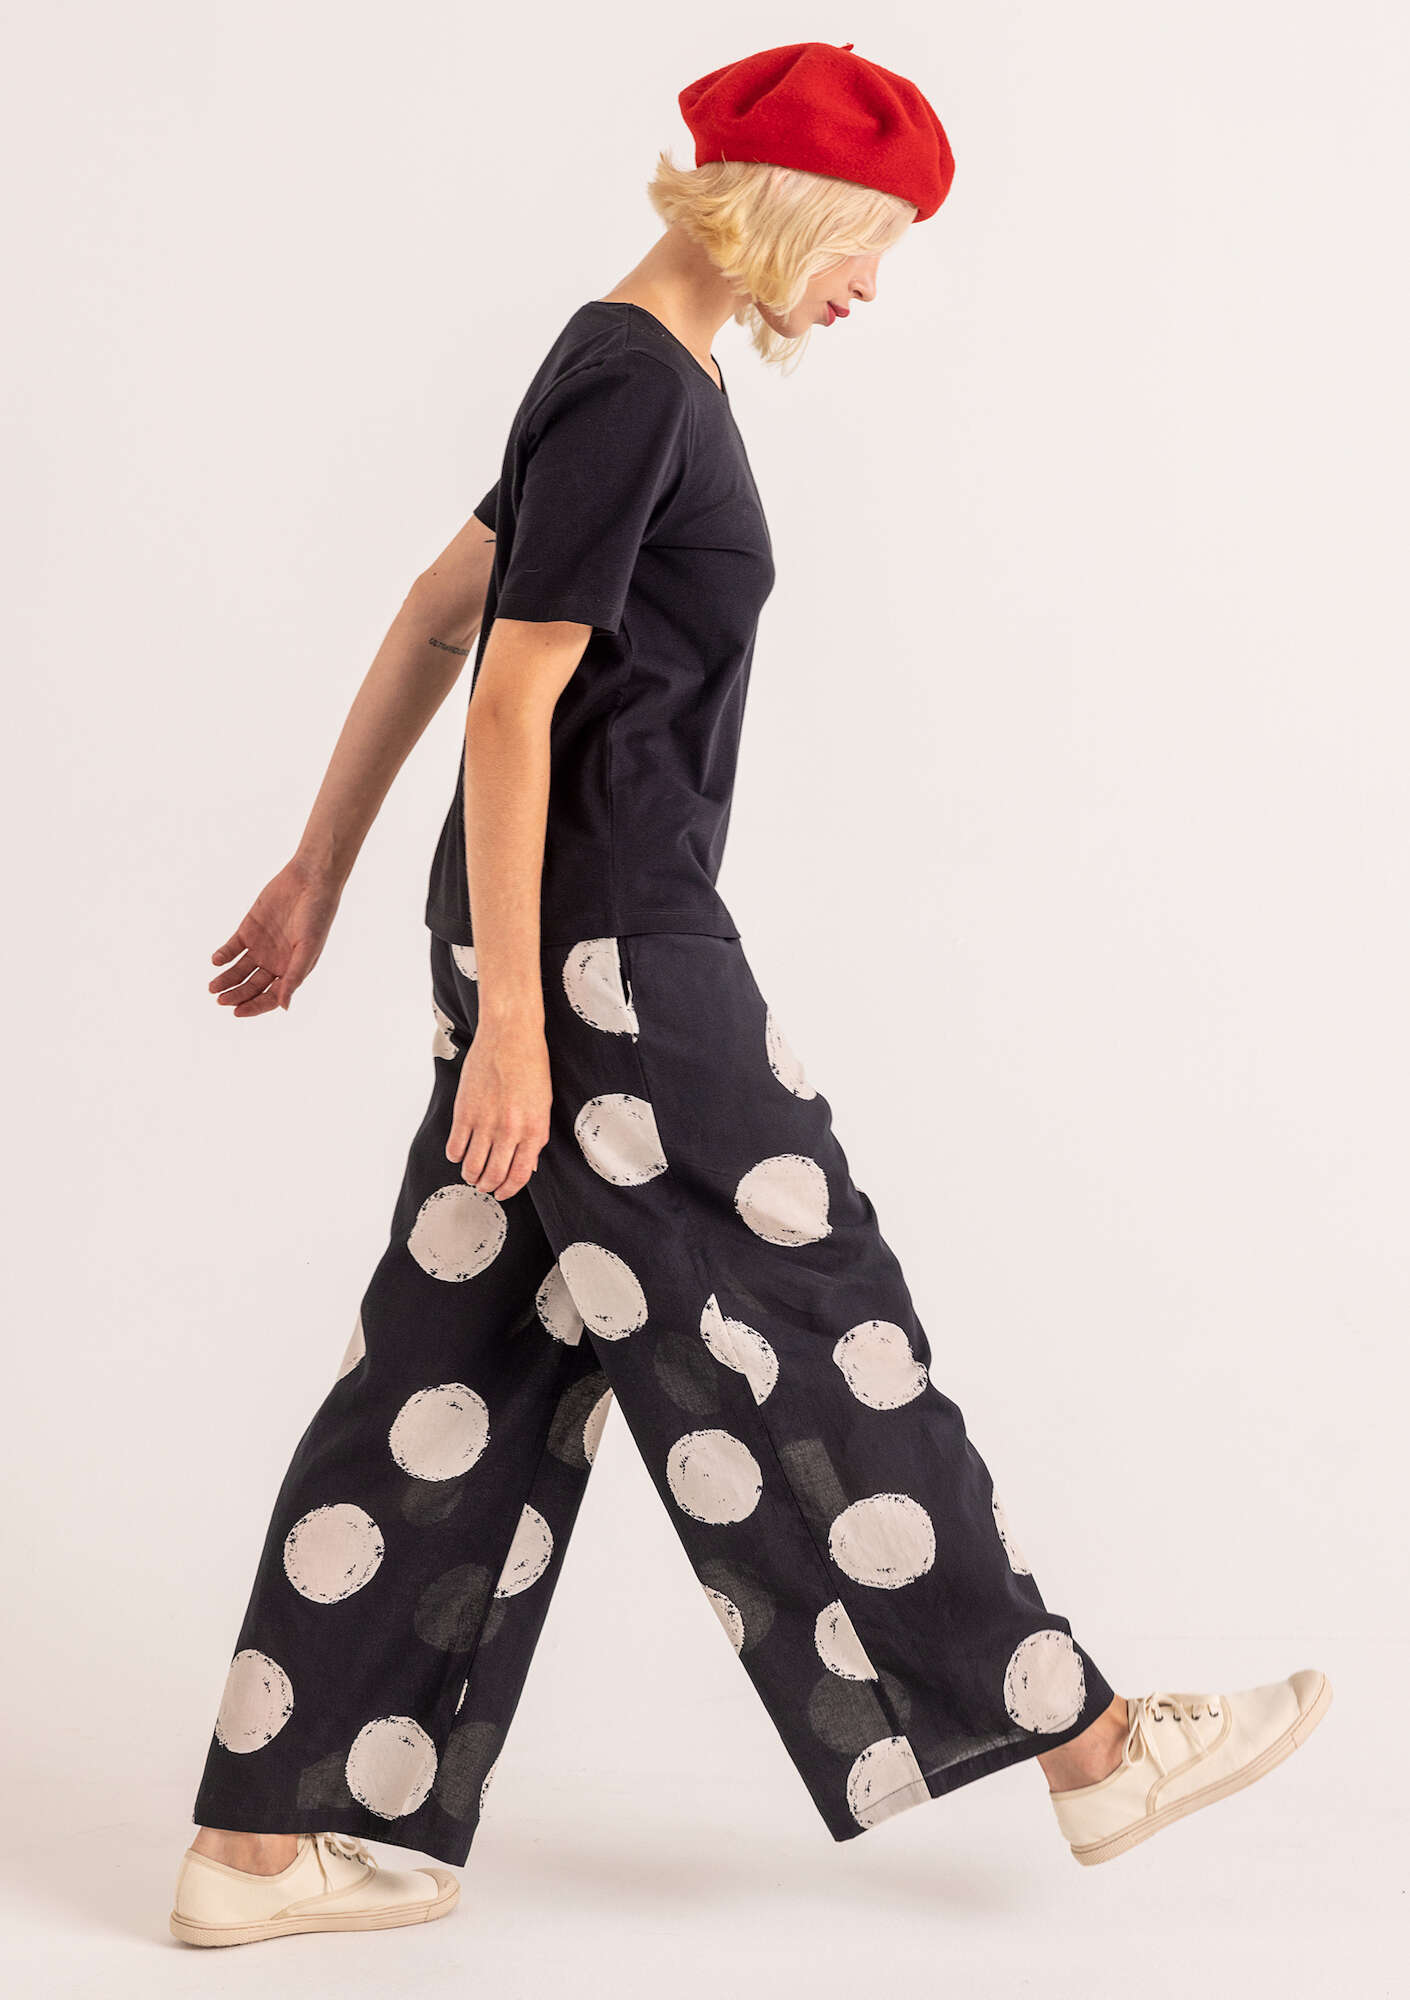  Woven “Palette” pants in organic cotton black/patterned